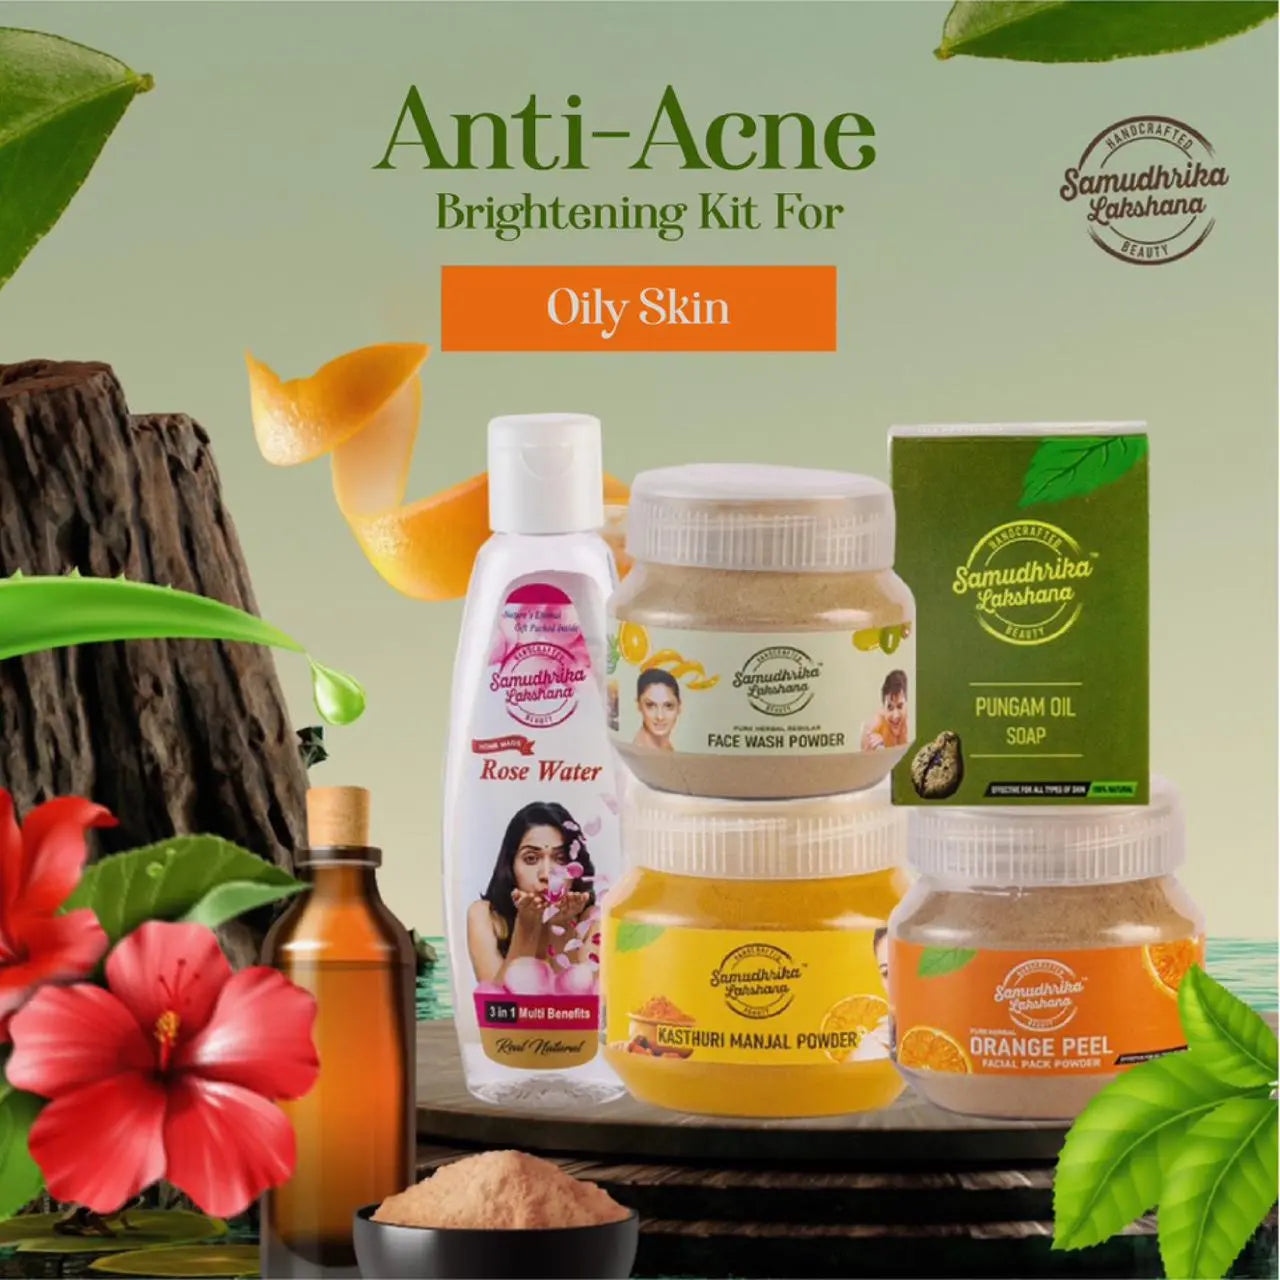 Samudhrika Lakshana's Herbal Solution Products for Oily Skin  Acne, Pimple, and Dark Spot Removal